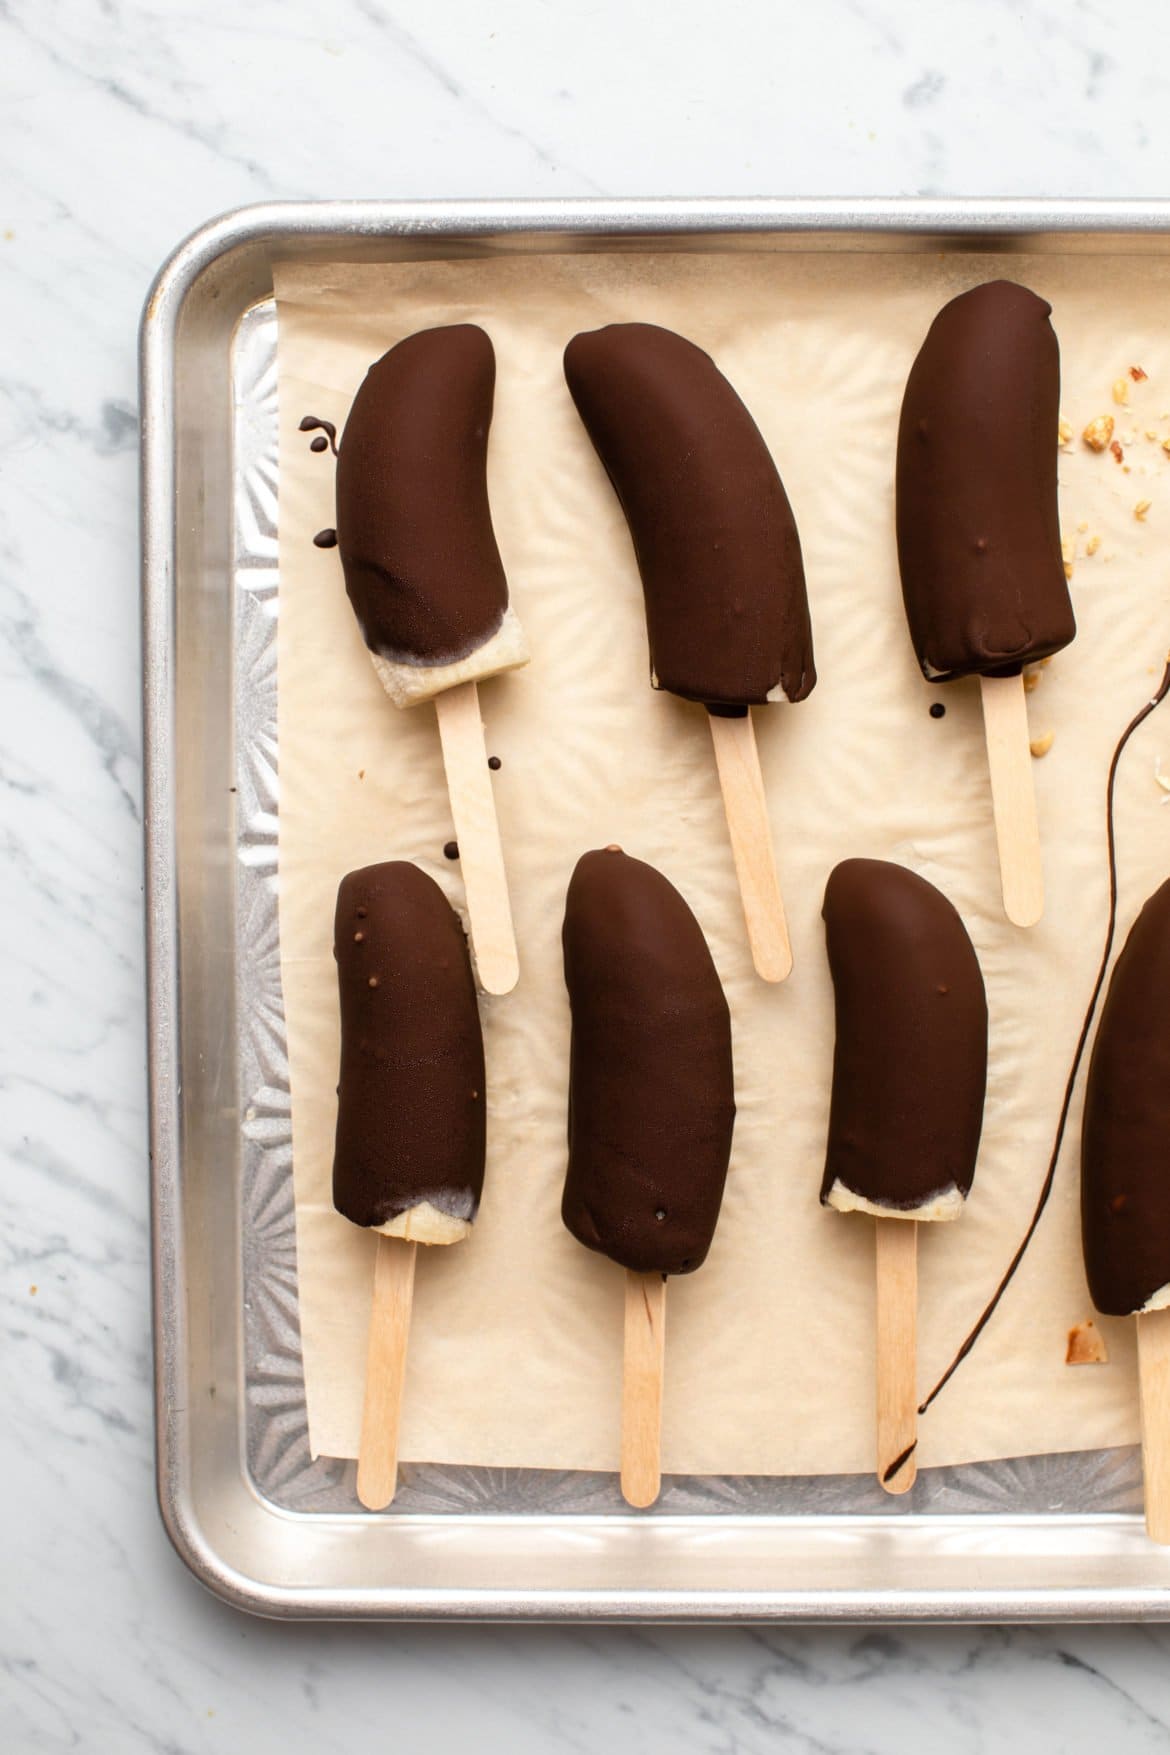 Chocolate Covered Banana Pops Healthy 3 Ingredient Dessert From My Bowl